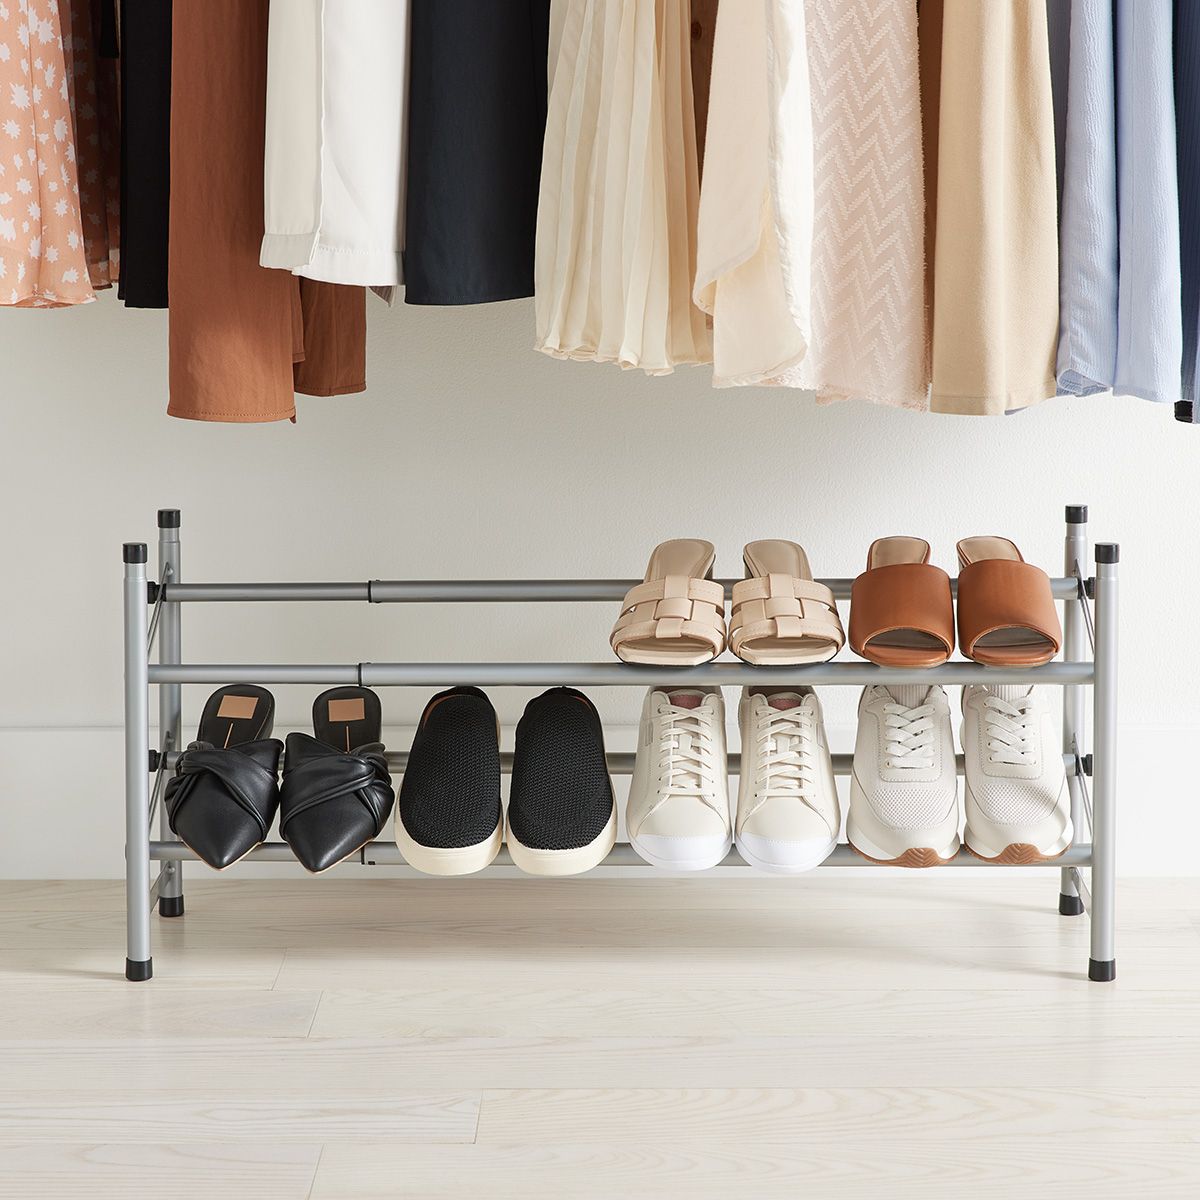 Platinum 2 Tier Adjustable Shoe Rack | The Container Store Throughout 2 Tier Adjustable Wardrobes (Gallery 7 of 20)